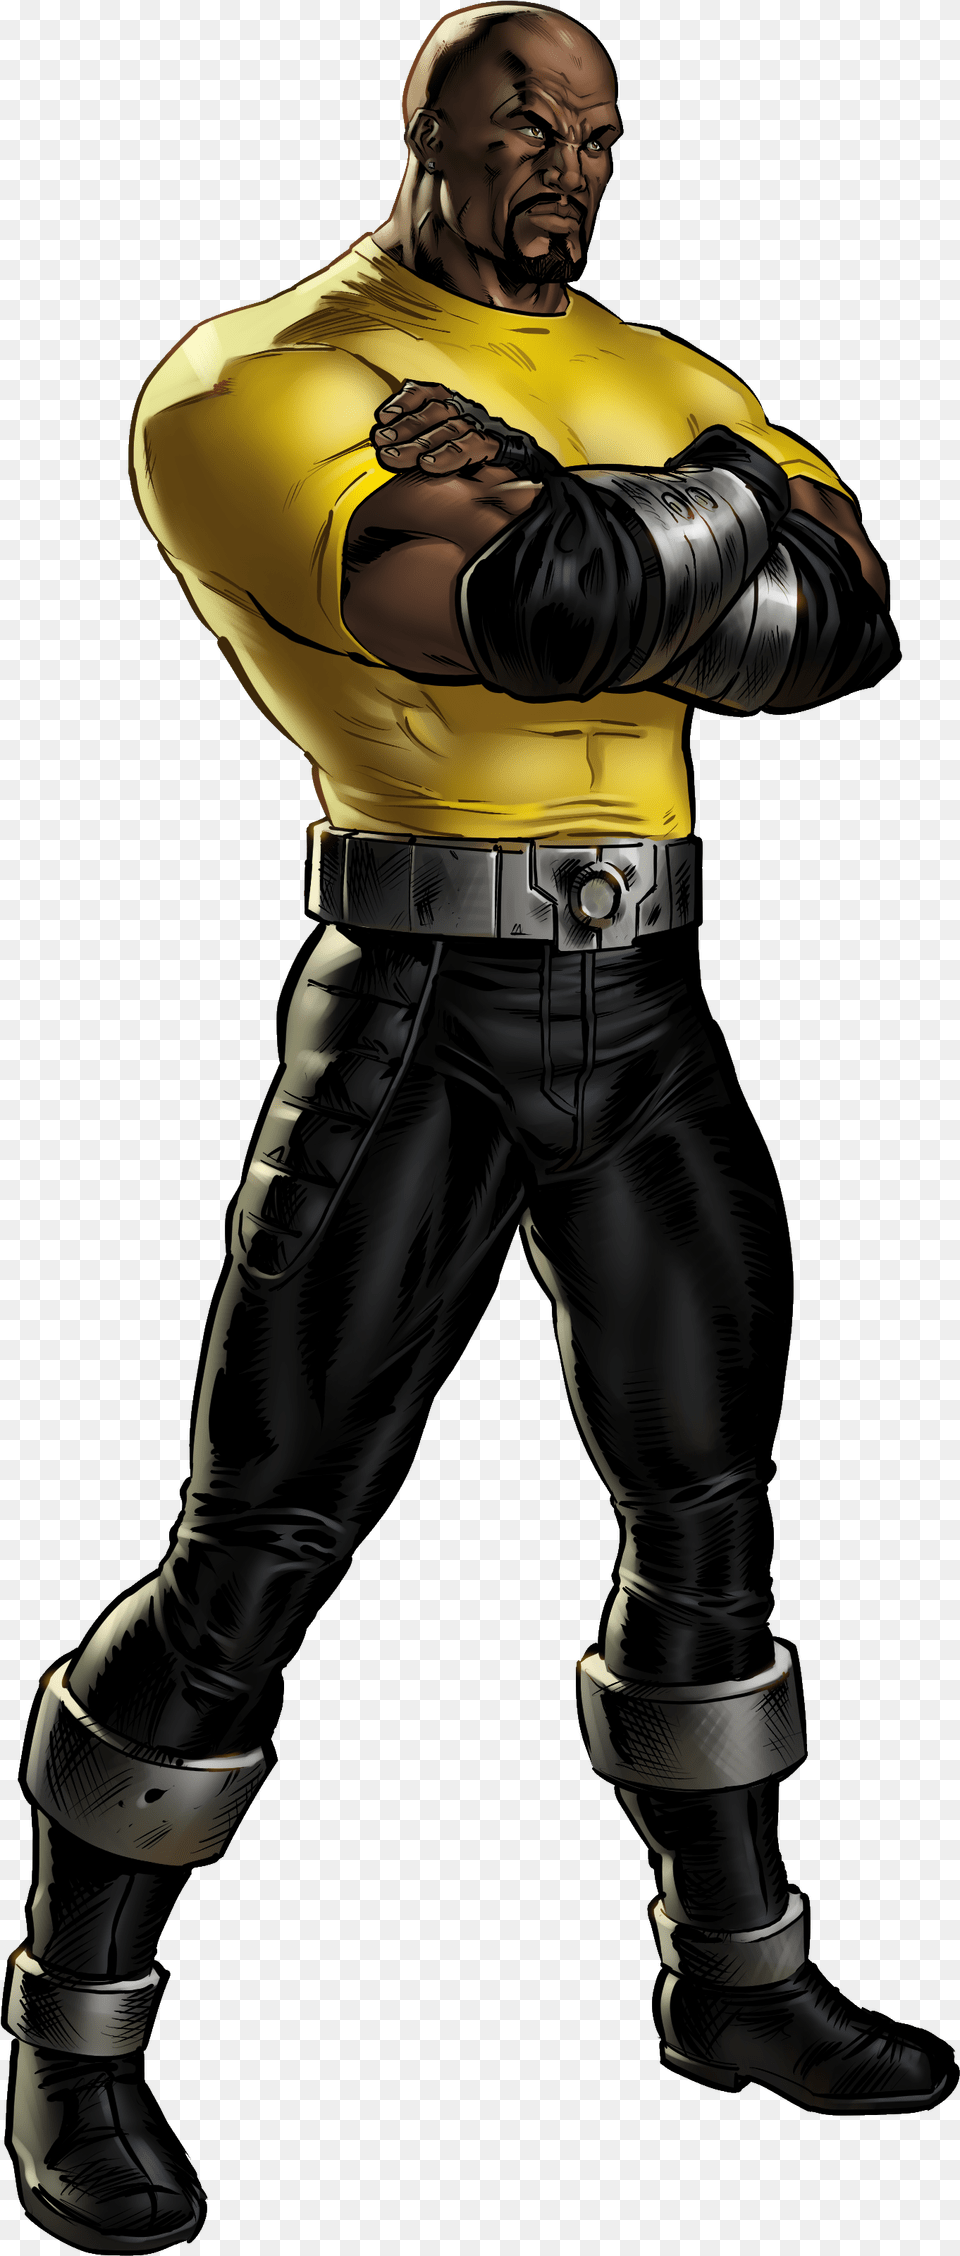 Luke Cage Luke Cage Marvel Comics, Male, Man, Person, Adult Png Image